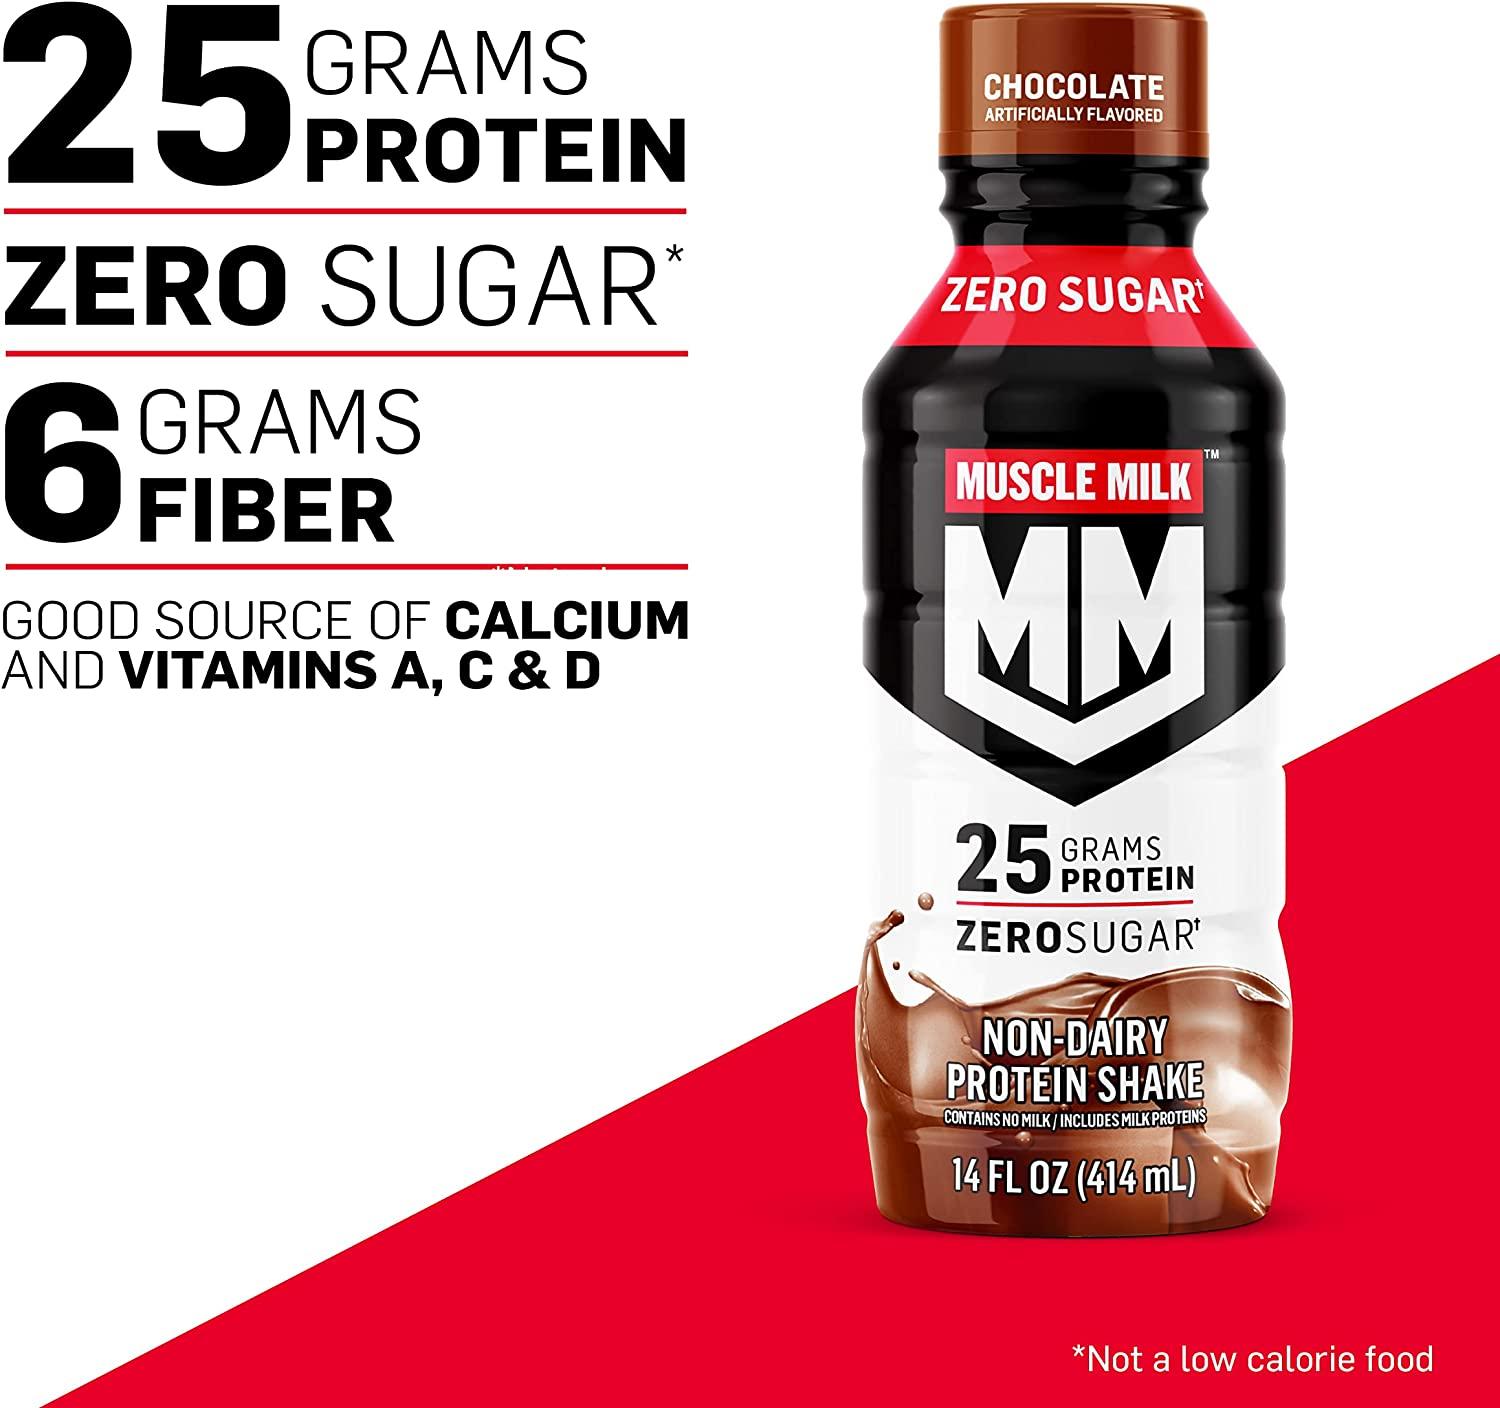 Muscle Milk Genuine Protein Shake, Chocolate, 14 Fl Oz Bottle, 12 Pack, 25g  Protein, Zero Sugar, Calcium, Vitamins A, C & D, 6g Fiber, Energizing  Snack, Workout Recovery, Packaging May Vary Chocolate